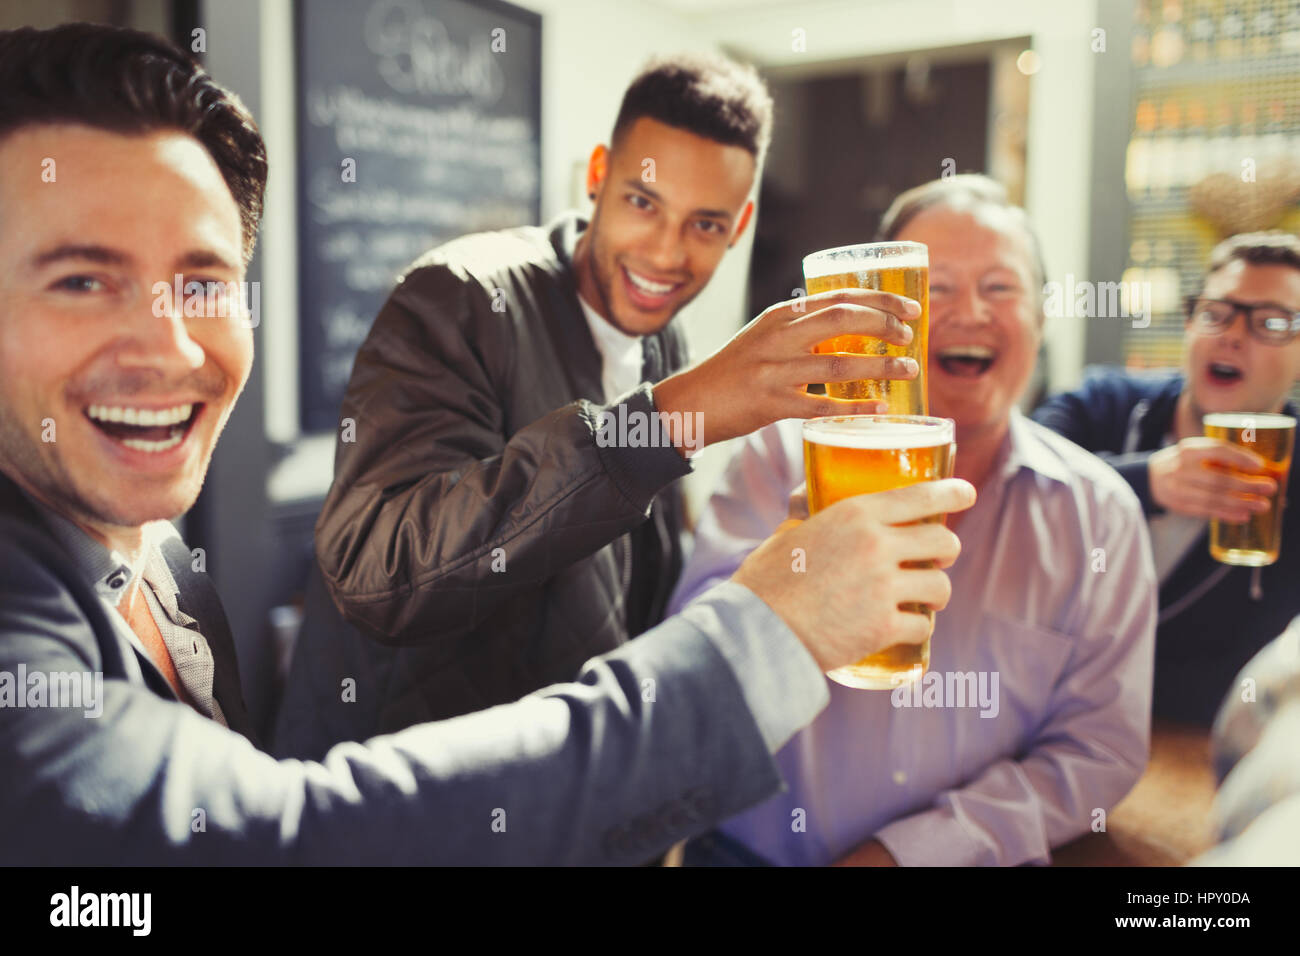 Enthusiastic men friends toasting beer glasses at bar Stock Photo